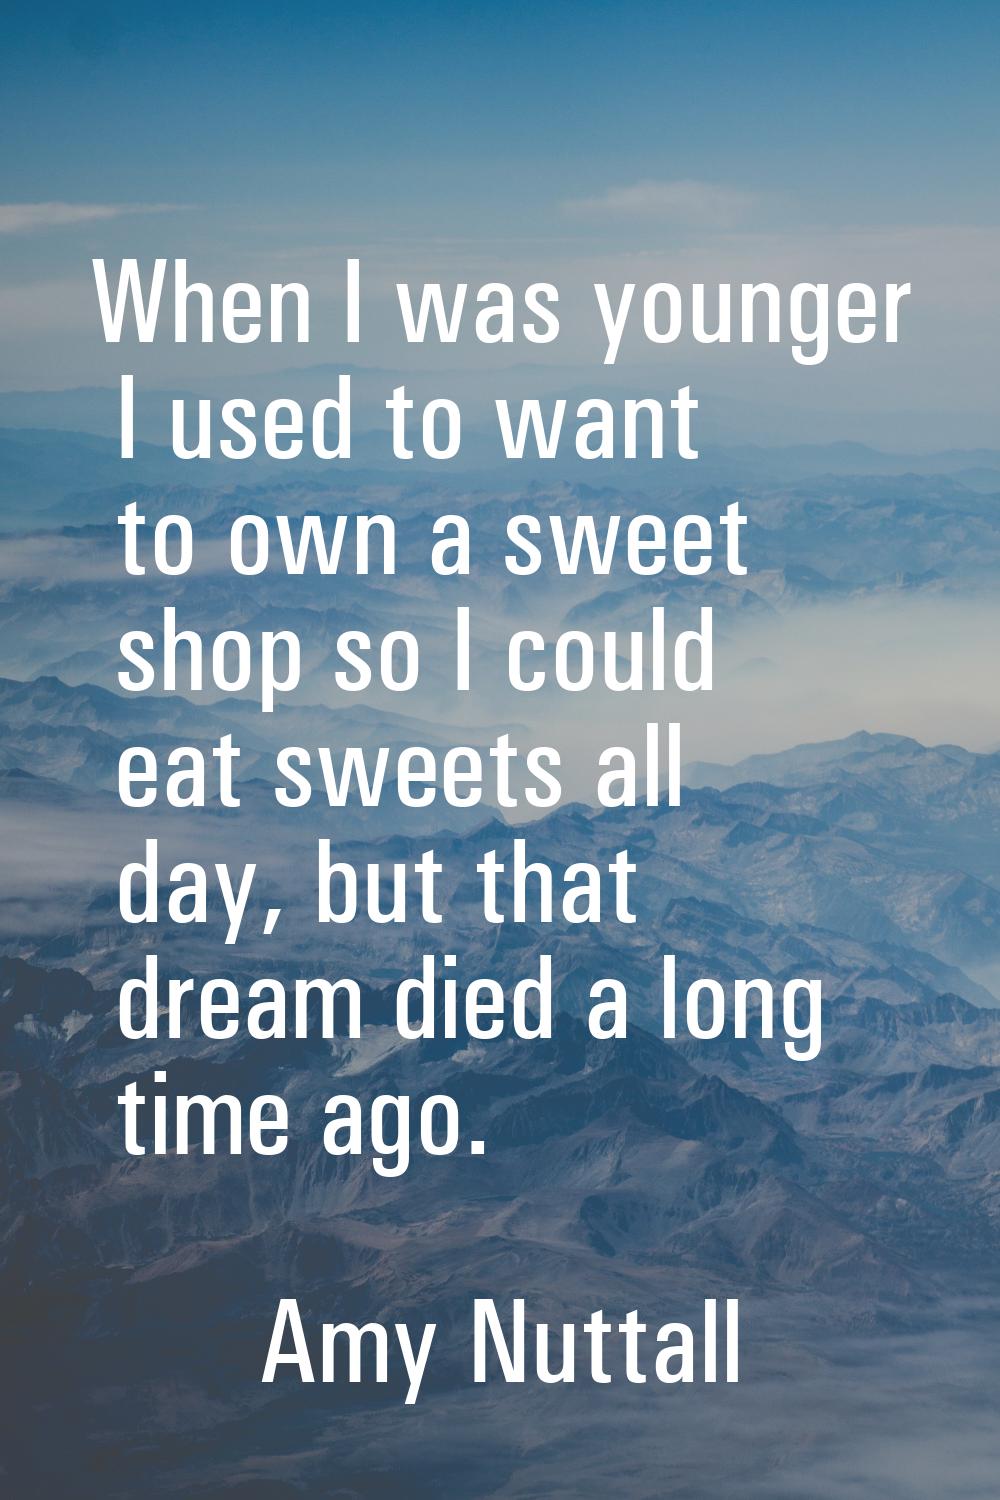 When I was younger I used to want to own a sweet shop so I could eat sweets all day, but that dream